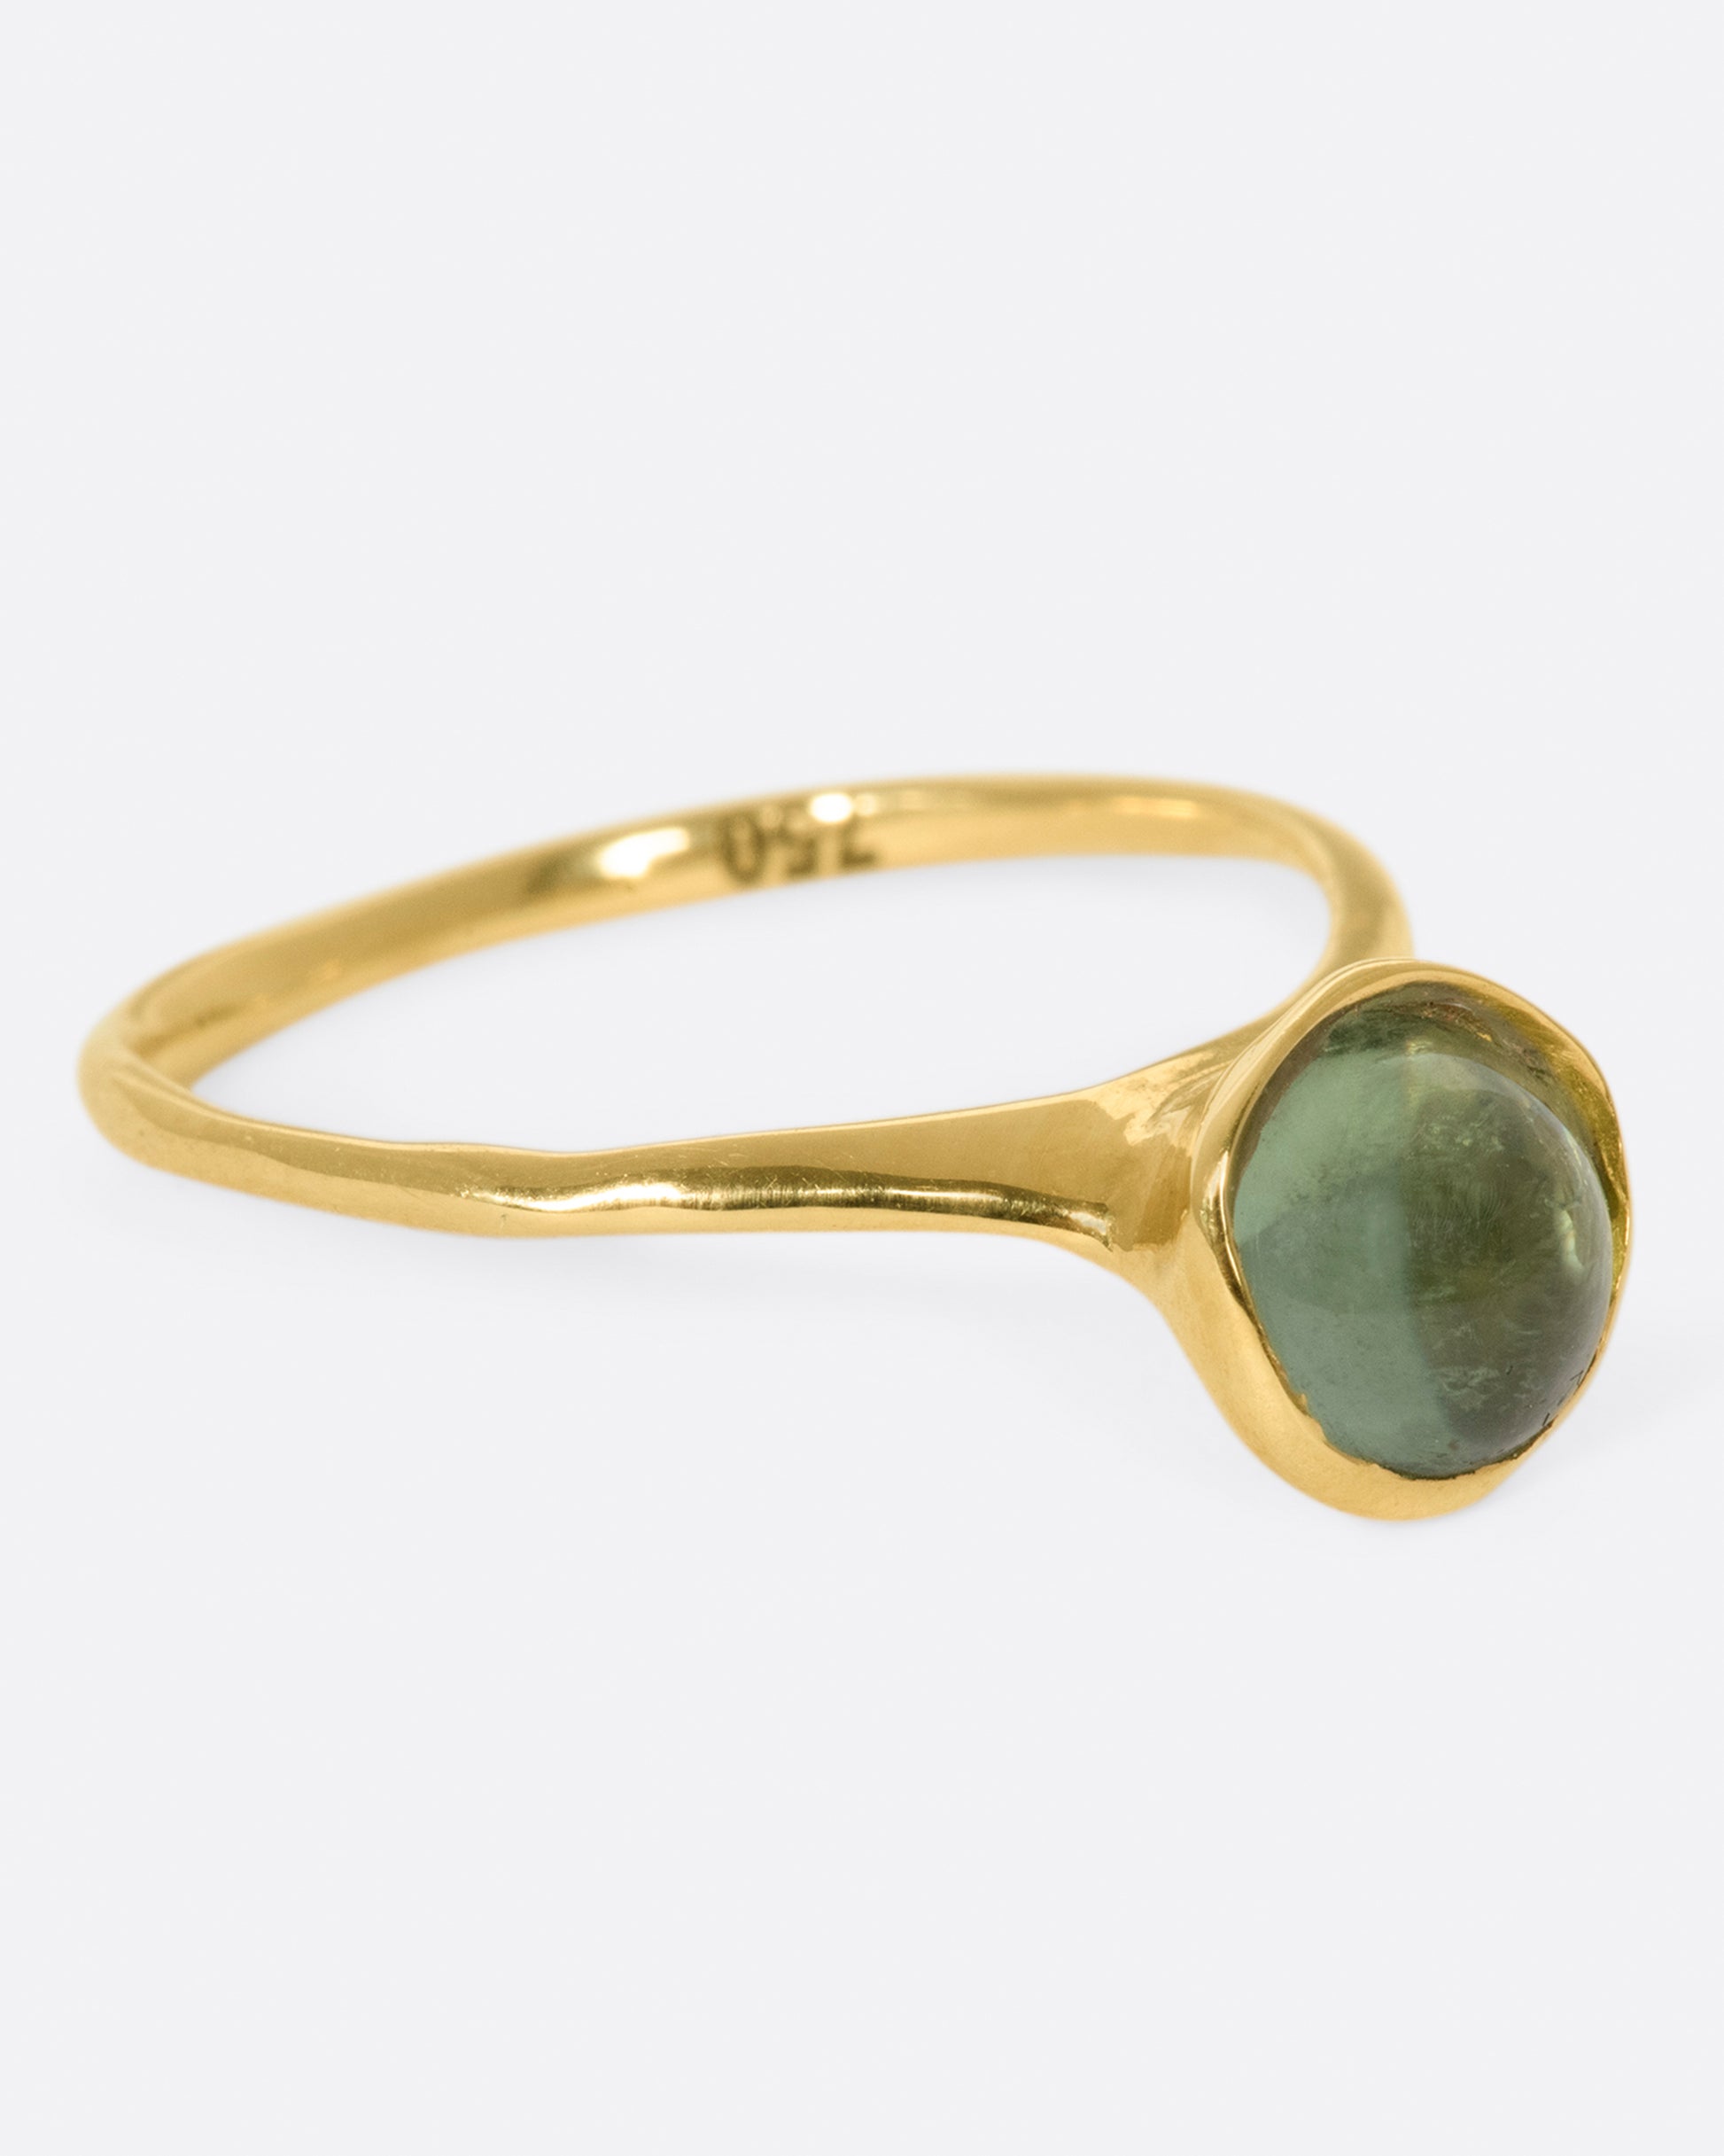 A sage-y green tourmaline cabochon is set in a bezel setting atop this ring.